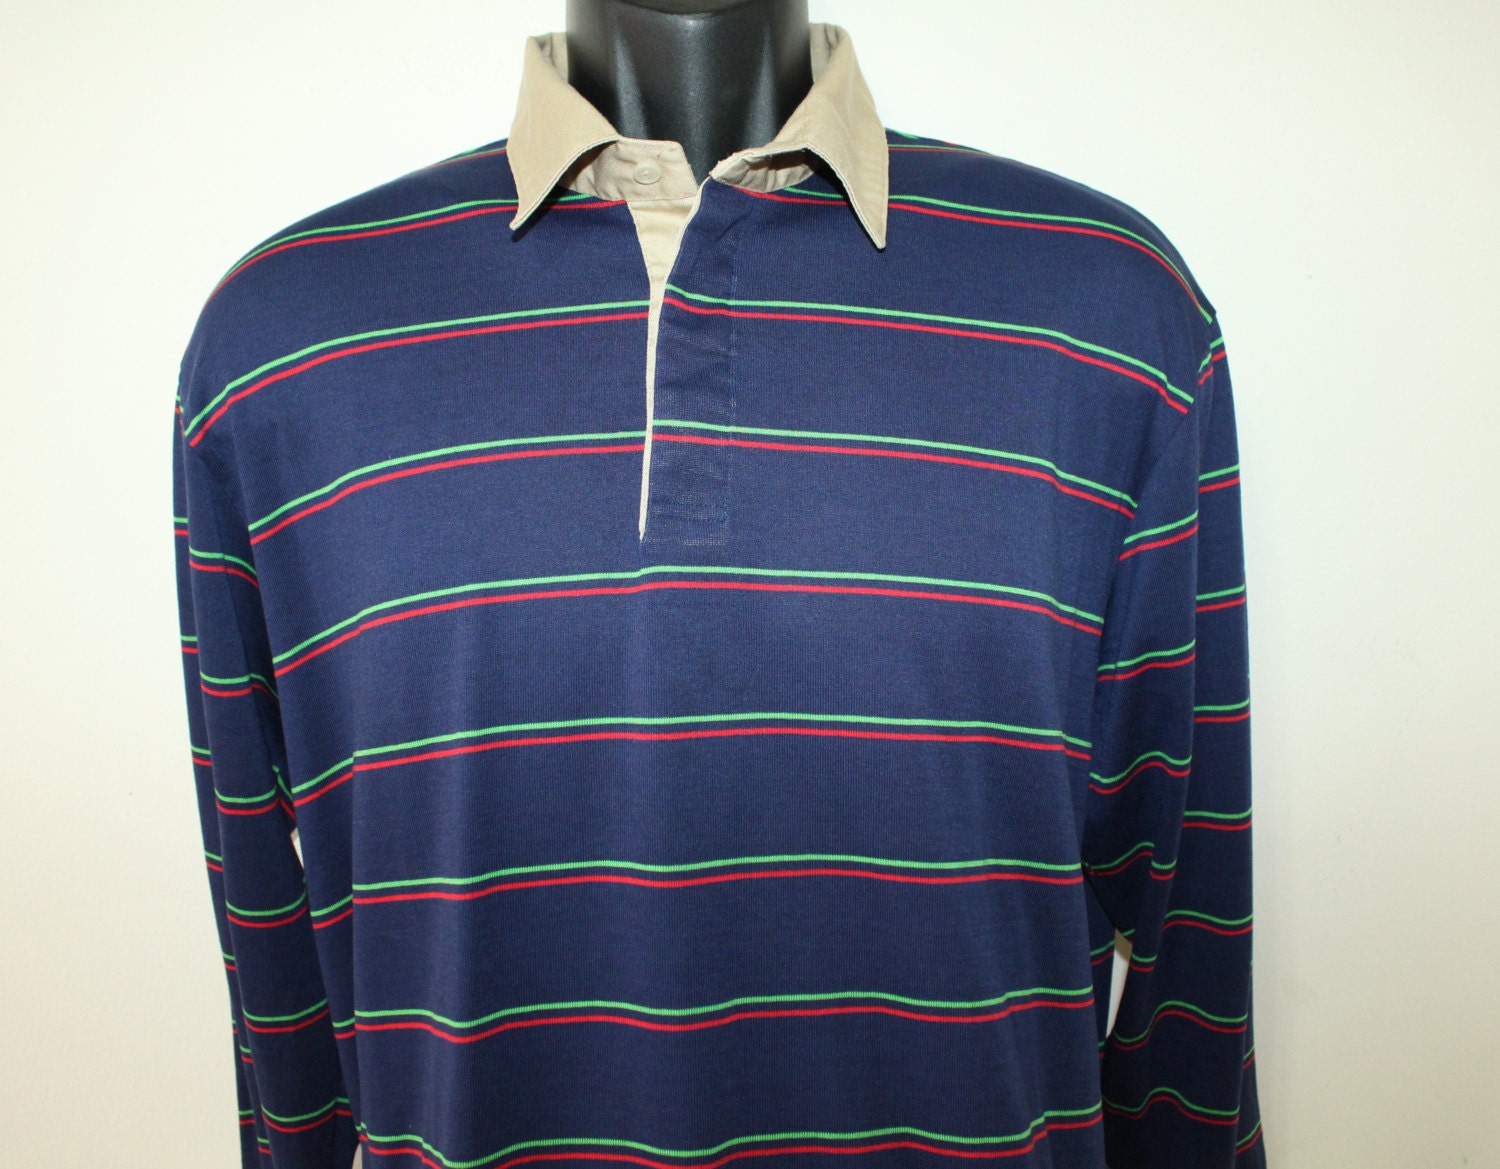 JCPenney Fox Collection vintage navy shirt by PreserveVintage